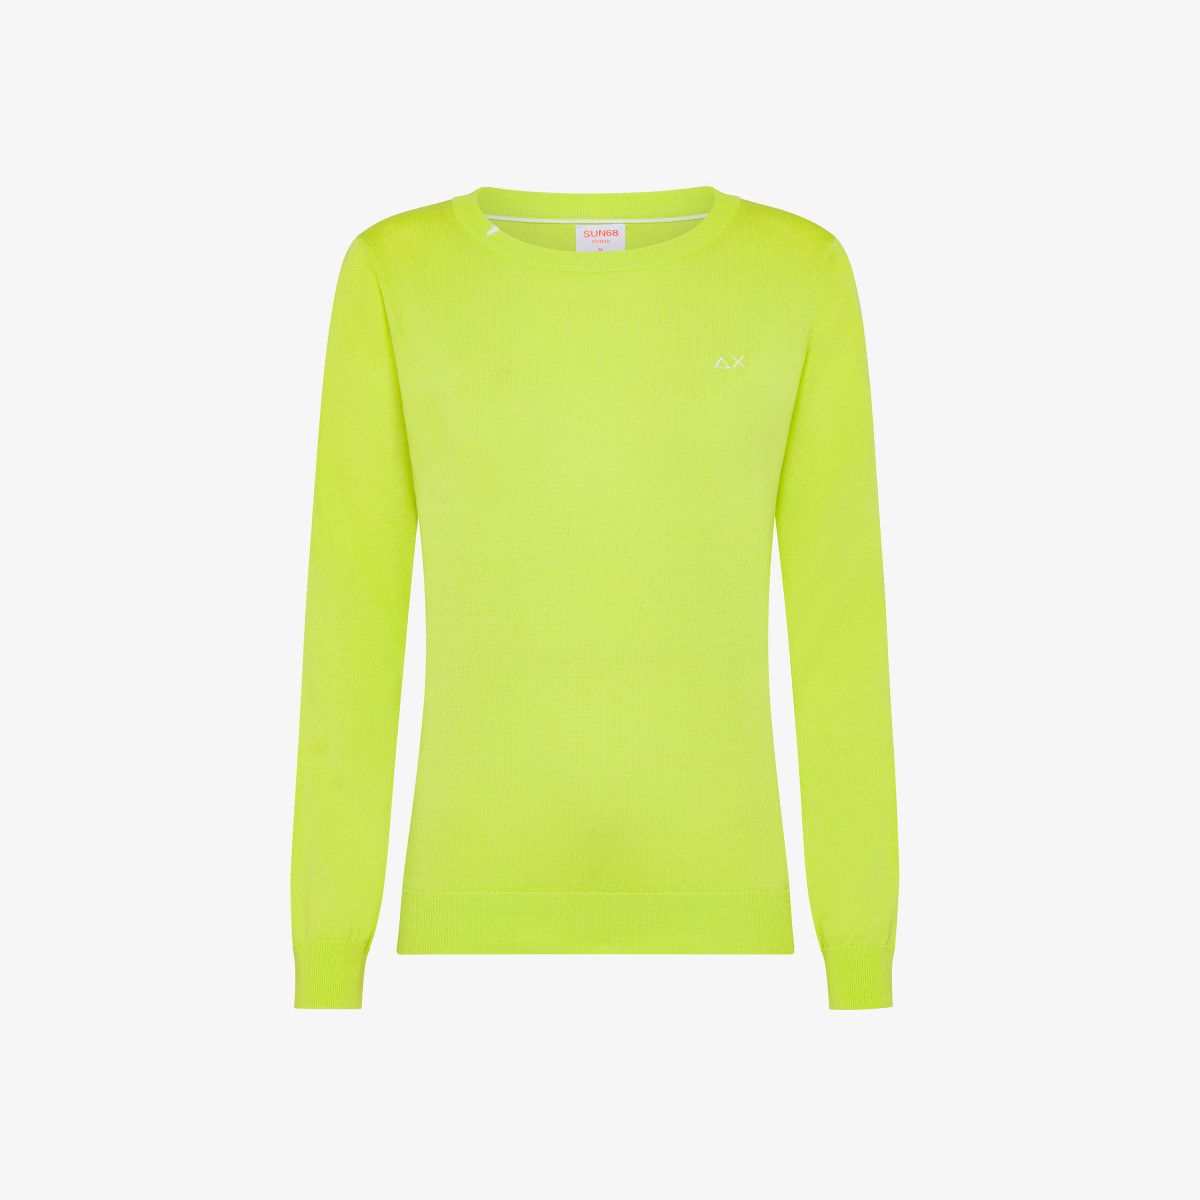 ROUND NECK SOLID L/S LIME